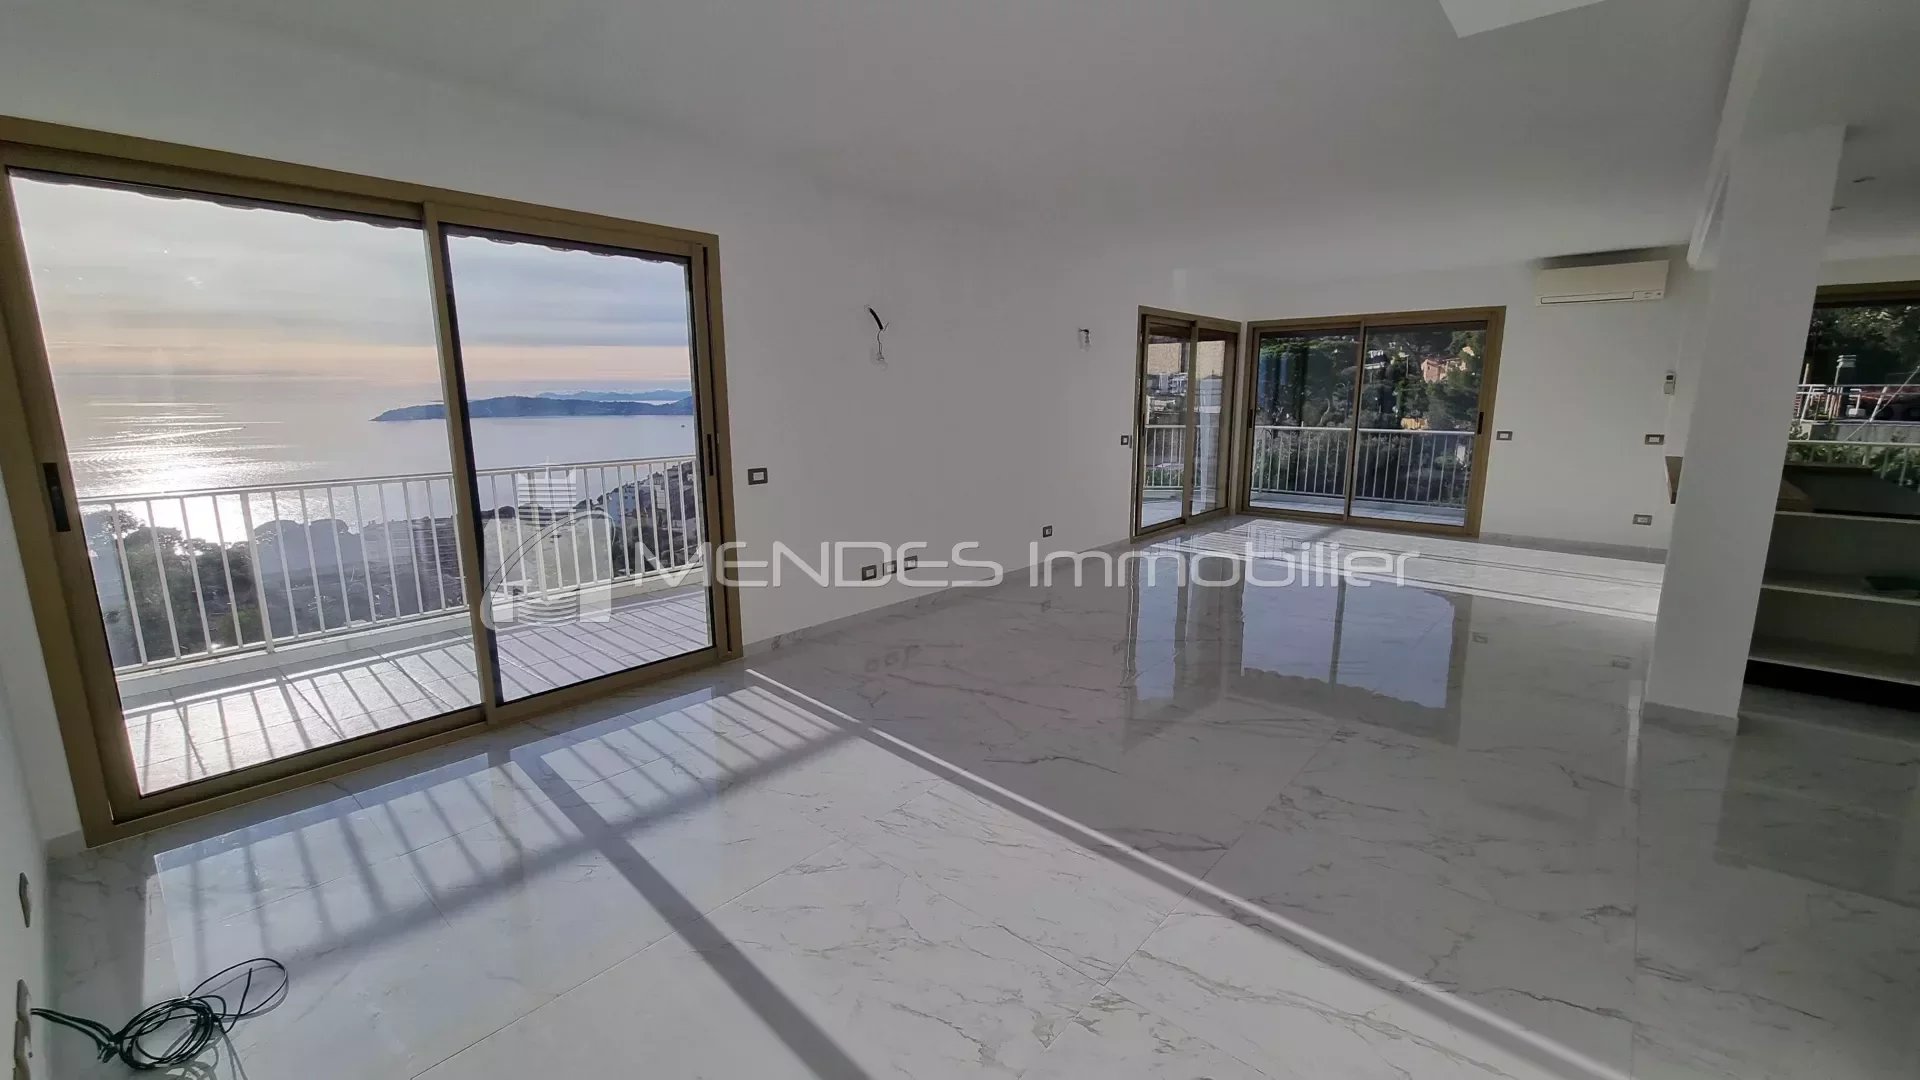 SUPERB TOP FLOOR FLAT WITH ROOF TERRACE IN CAP D'AIL